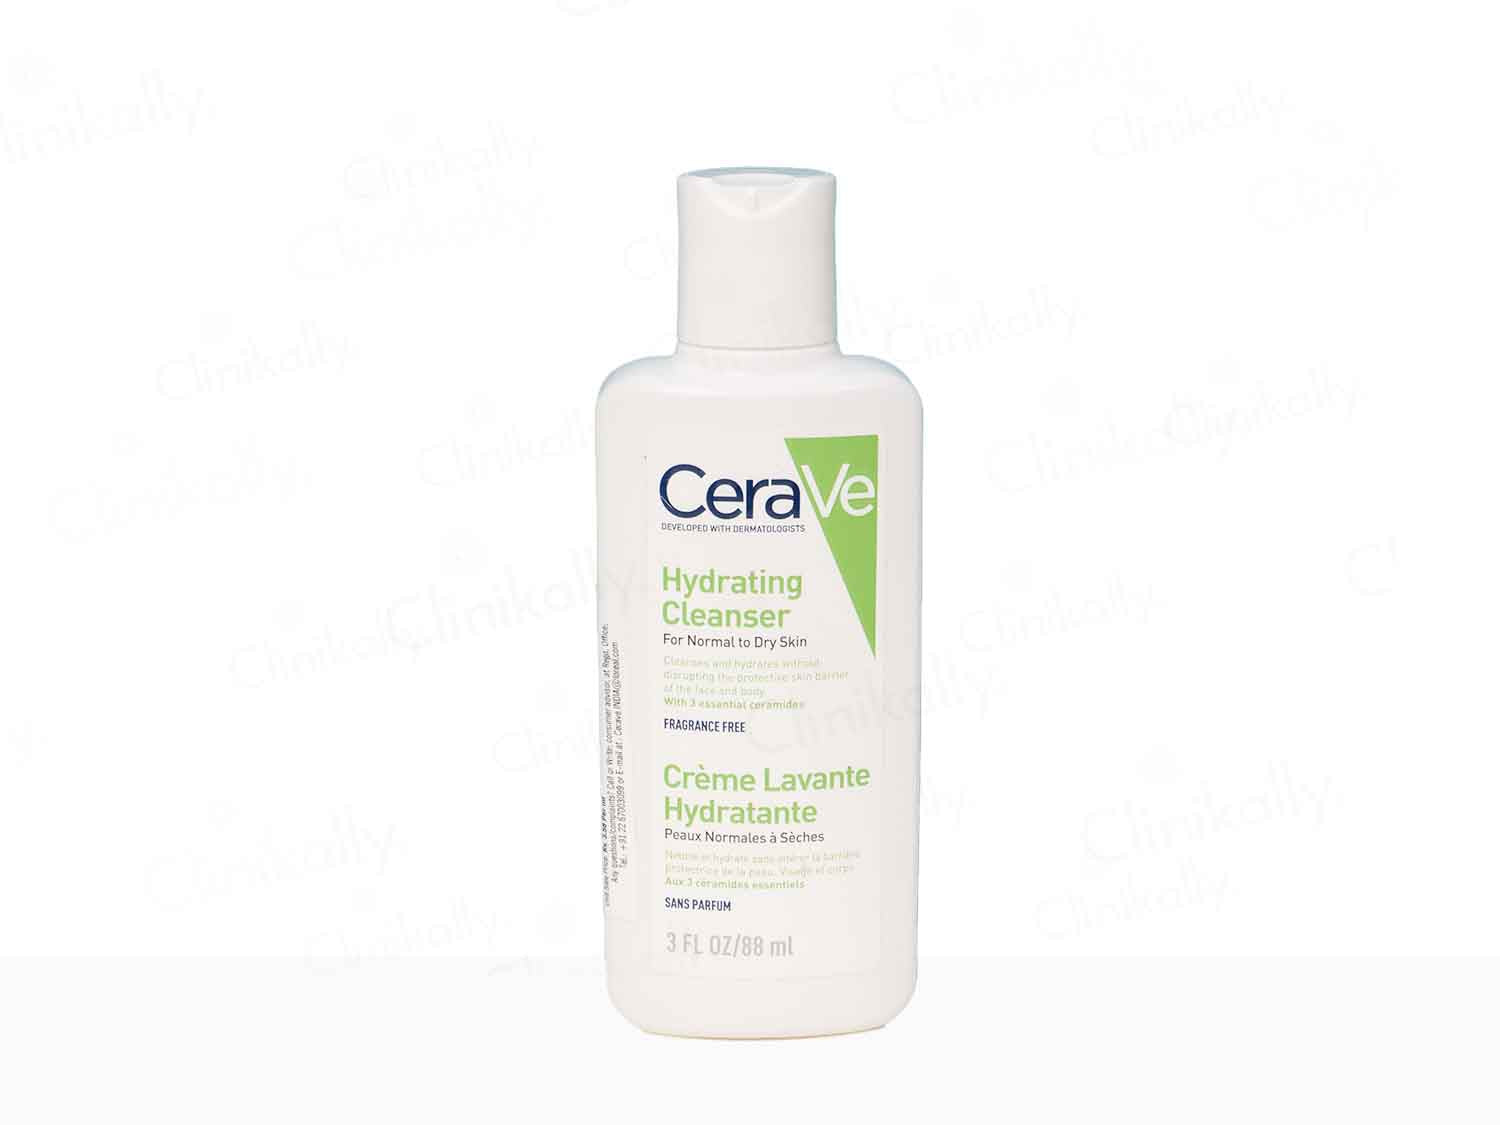 CeraVe Hydrating Cleanser for Normal to Dry Skin - Clinikally